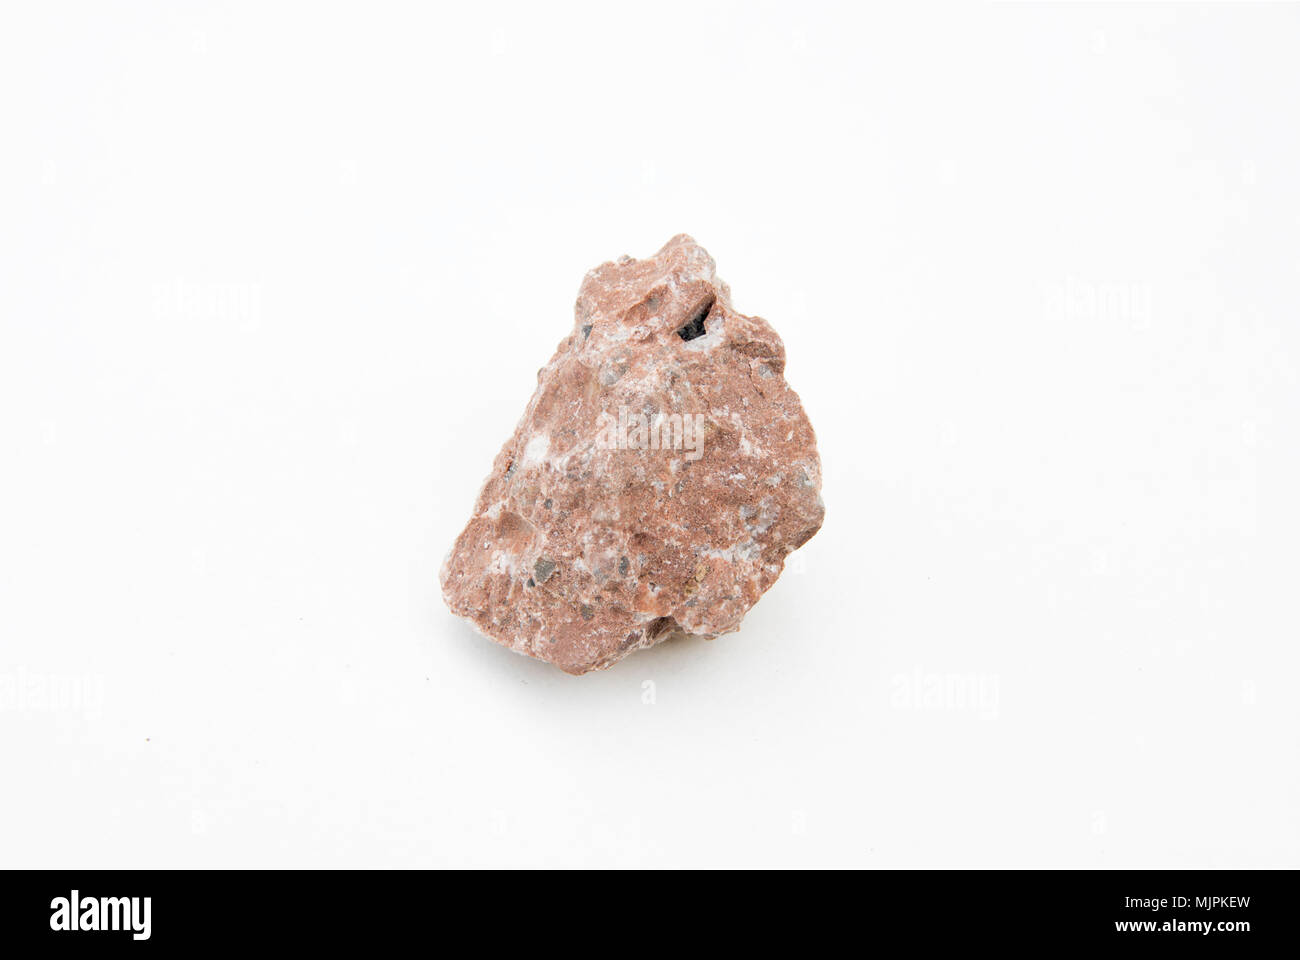 extreme close up with a lot of details of breccia rock isolated over white background Stock Photo